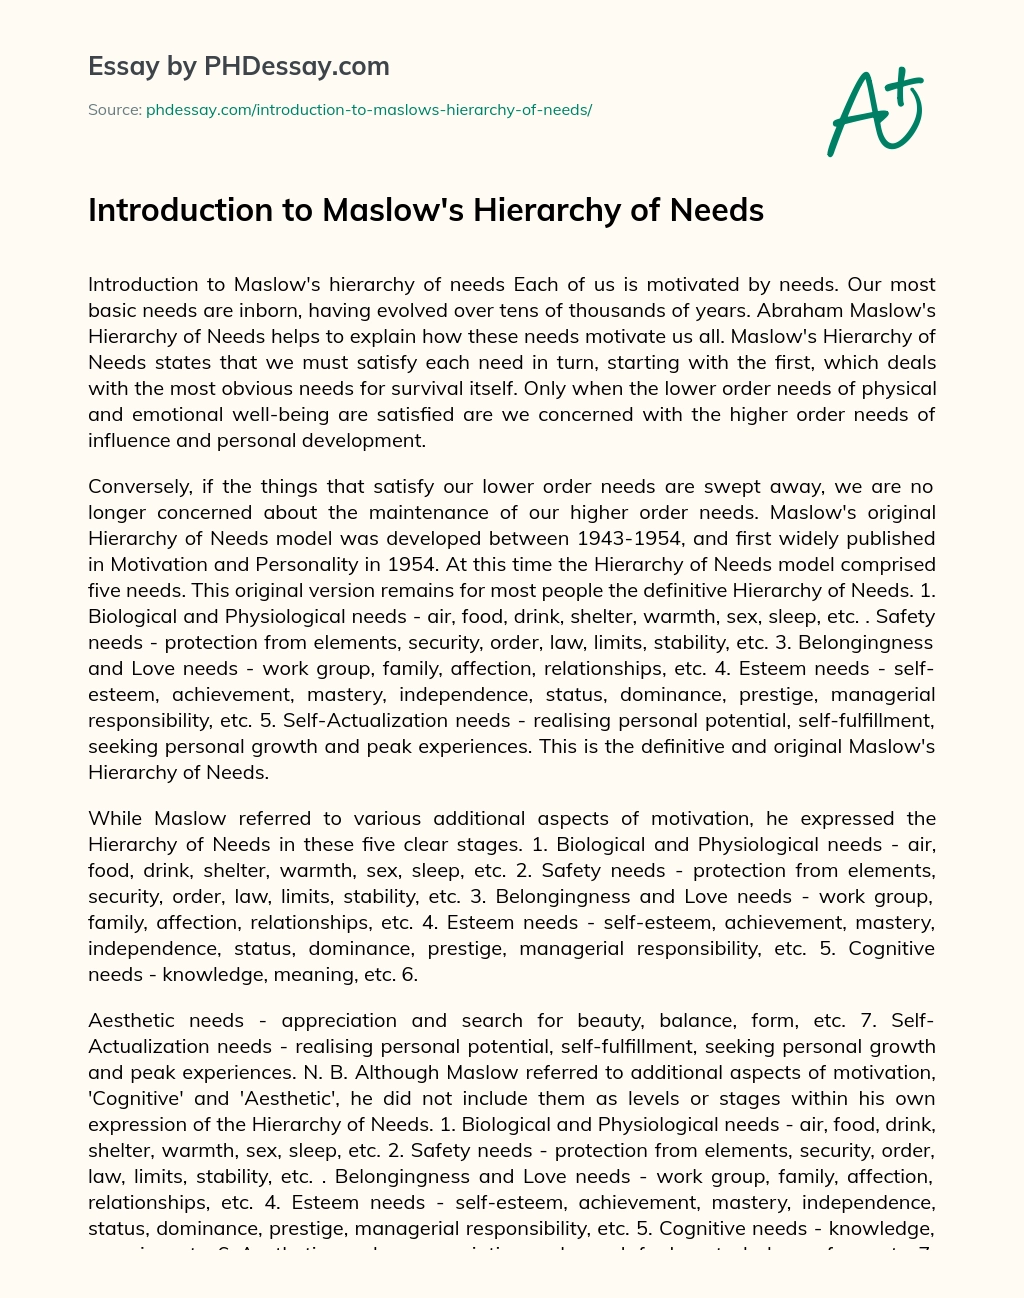 Introduction to Maslow’s Hierarchy of Needs essay